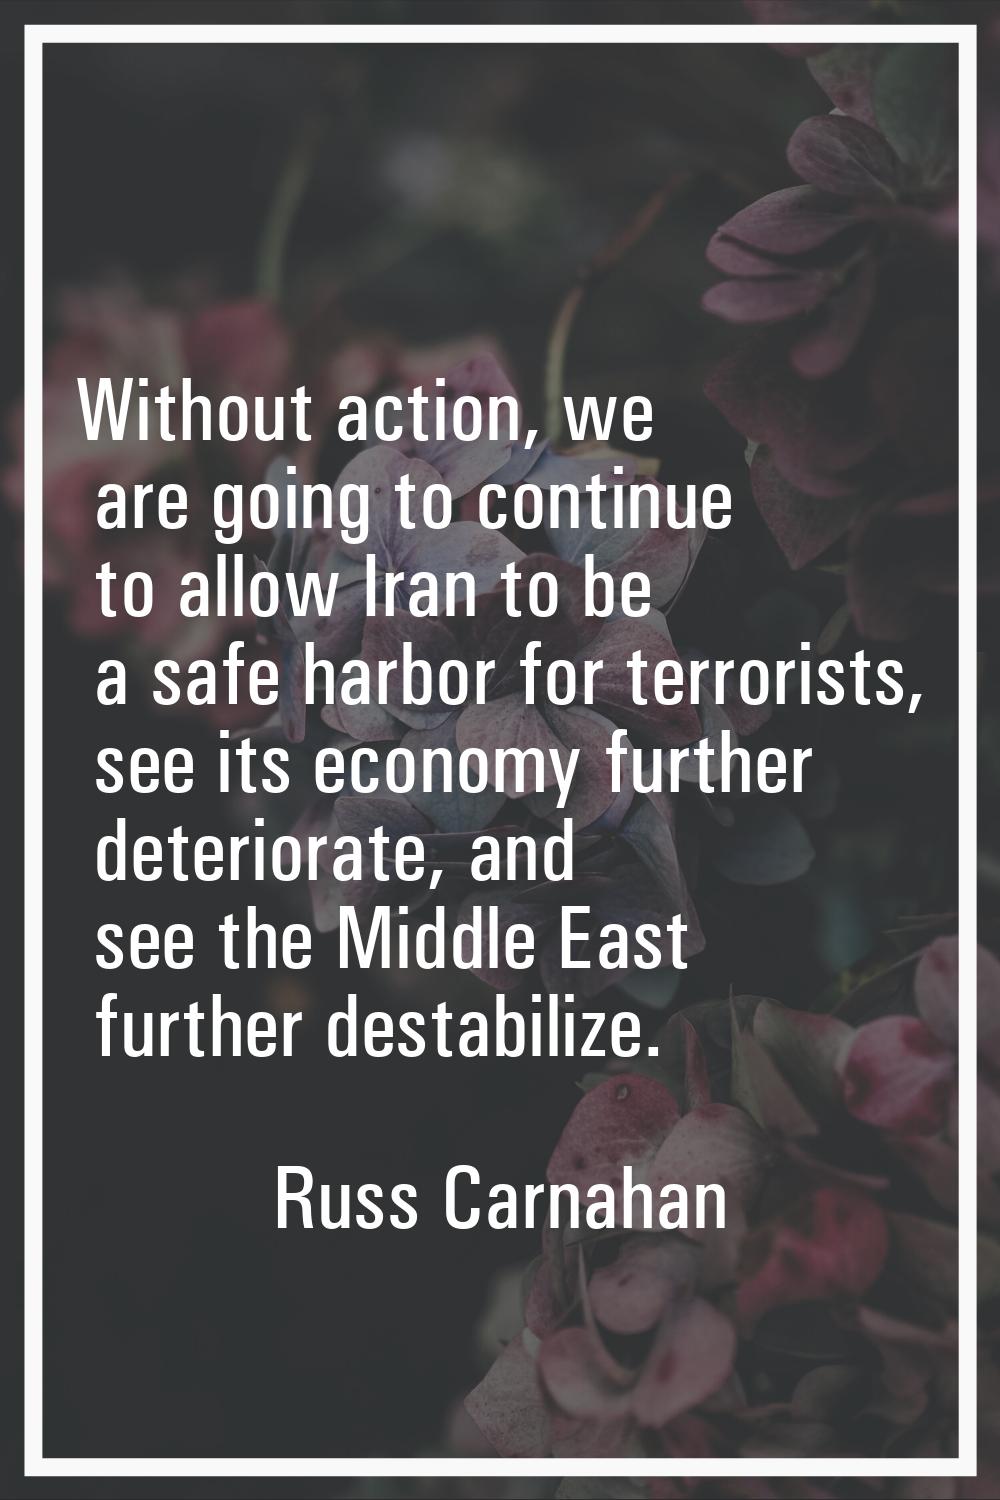 Without action, we are going to continue to allow Iran to be a safe harbor for terrorists, see its 